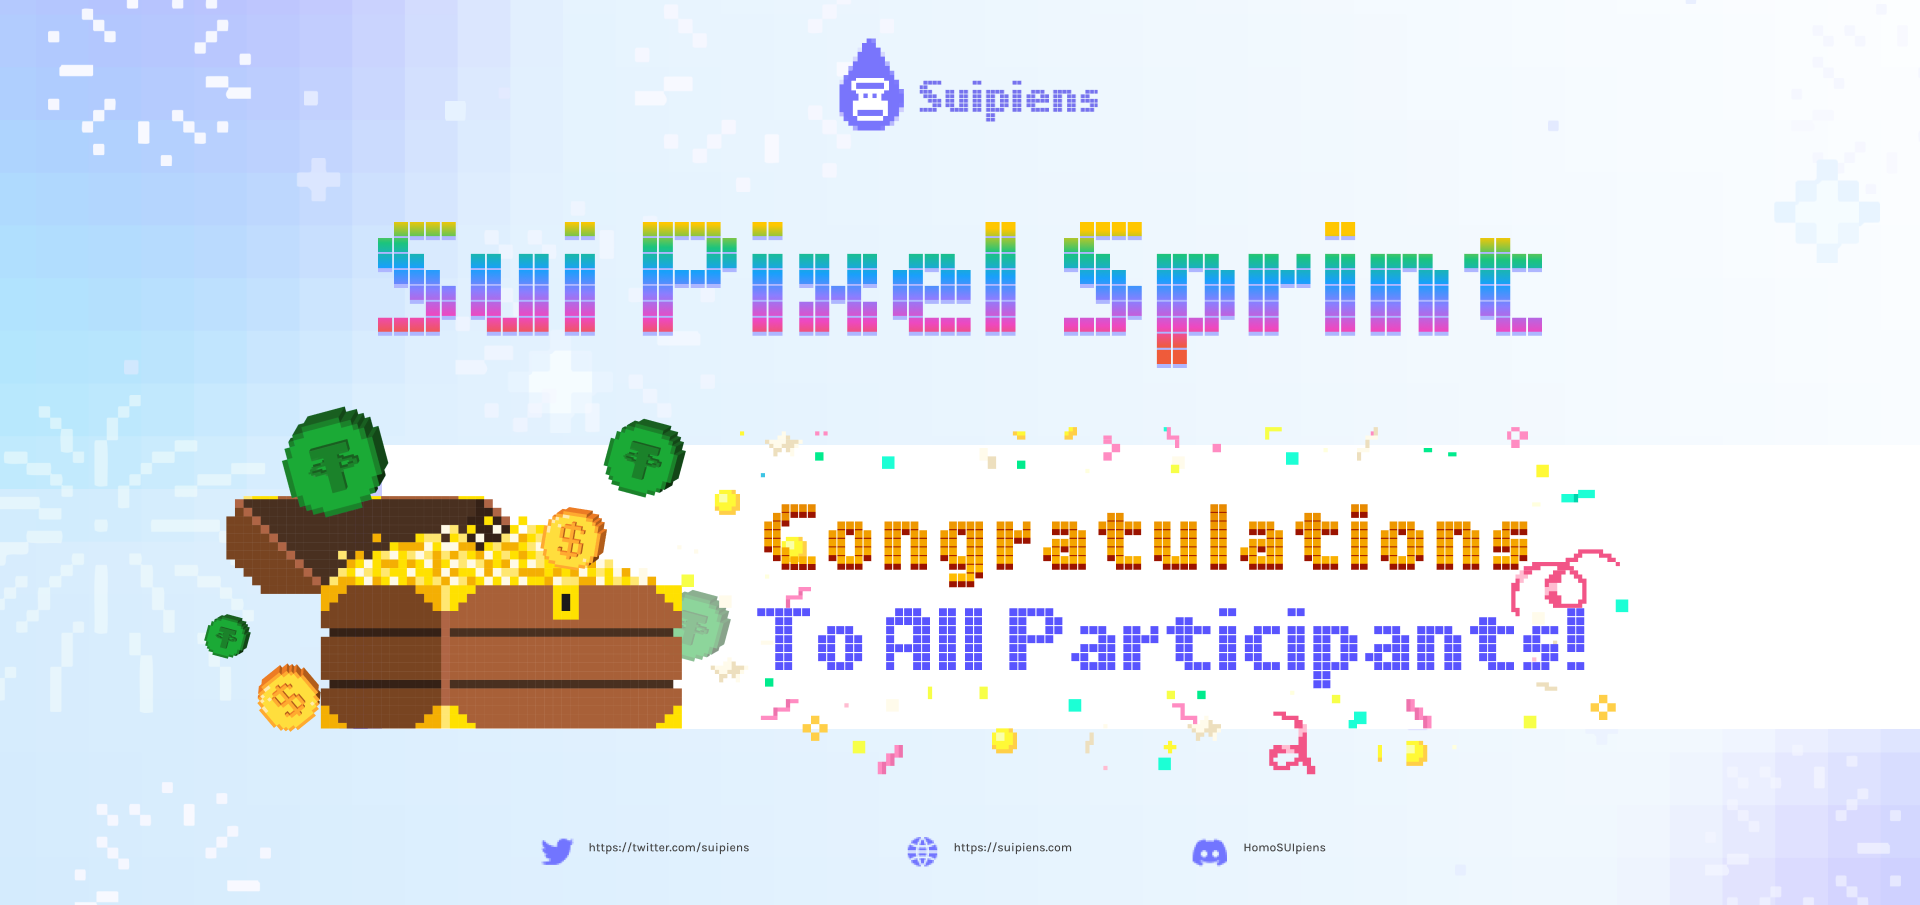 Suipiens Crew3 Sprint Winners Announced: Congratulations to All Participants!